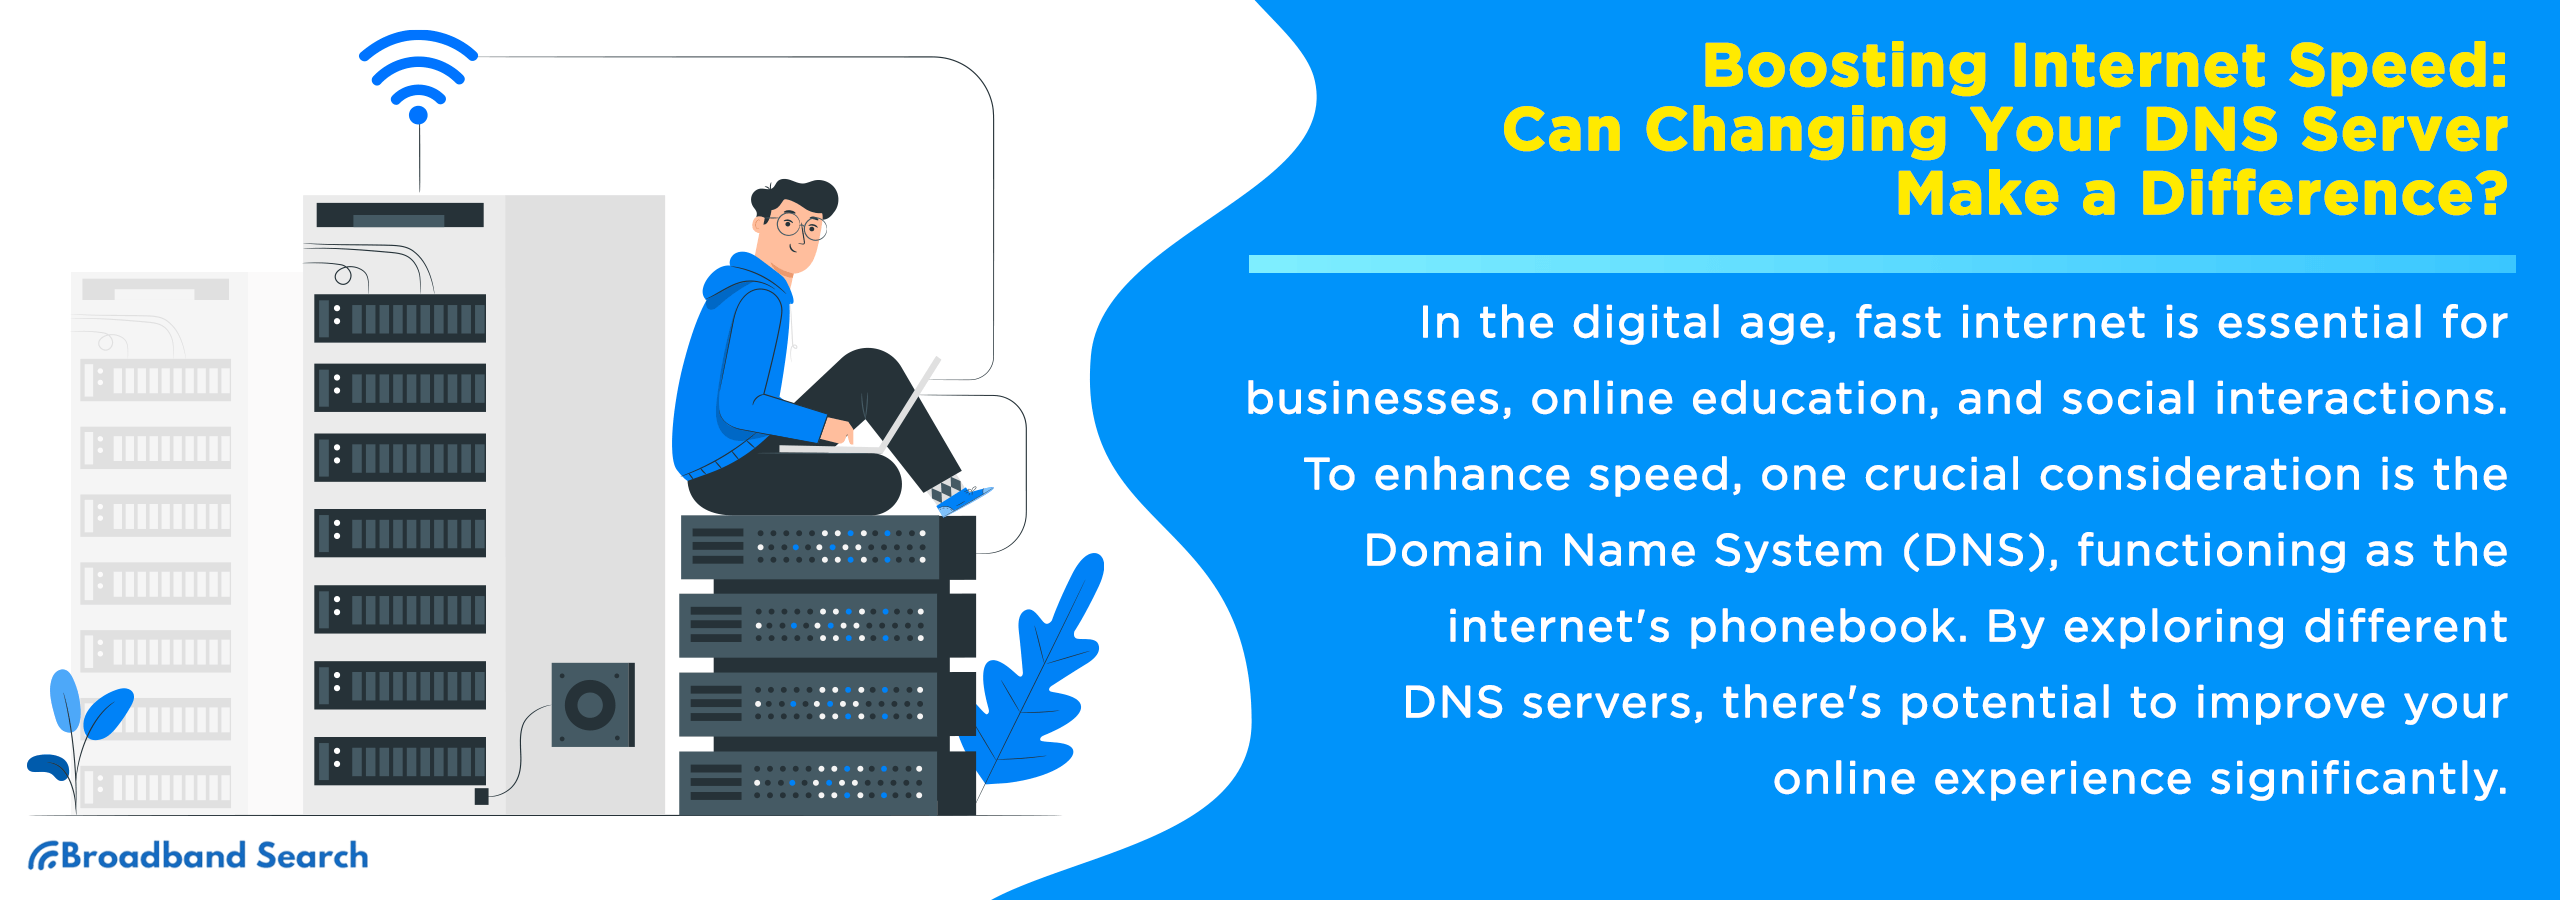 Boosting Internet Speed: Can Changing Your DNS Server Make a Difference?